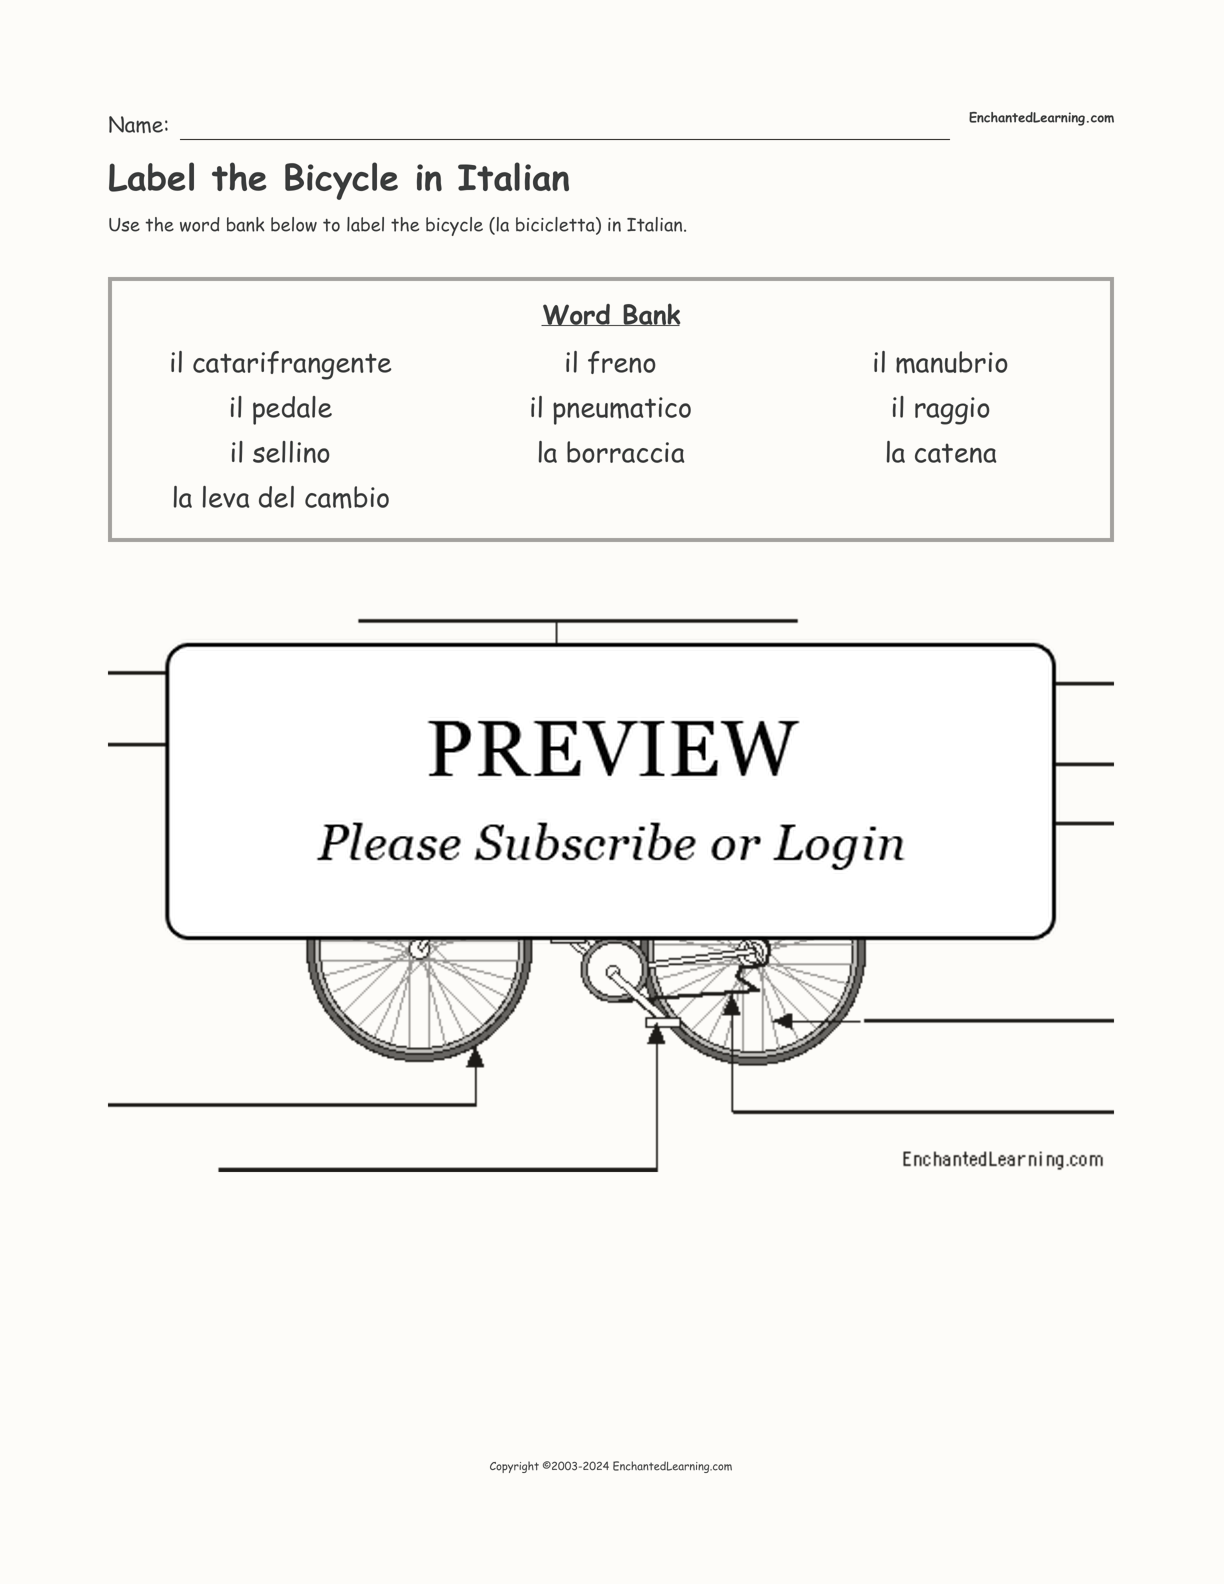 Label the Bicycle in Italian interactive worksheet page 1